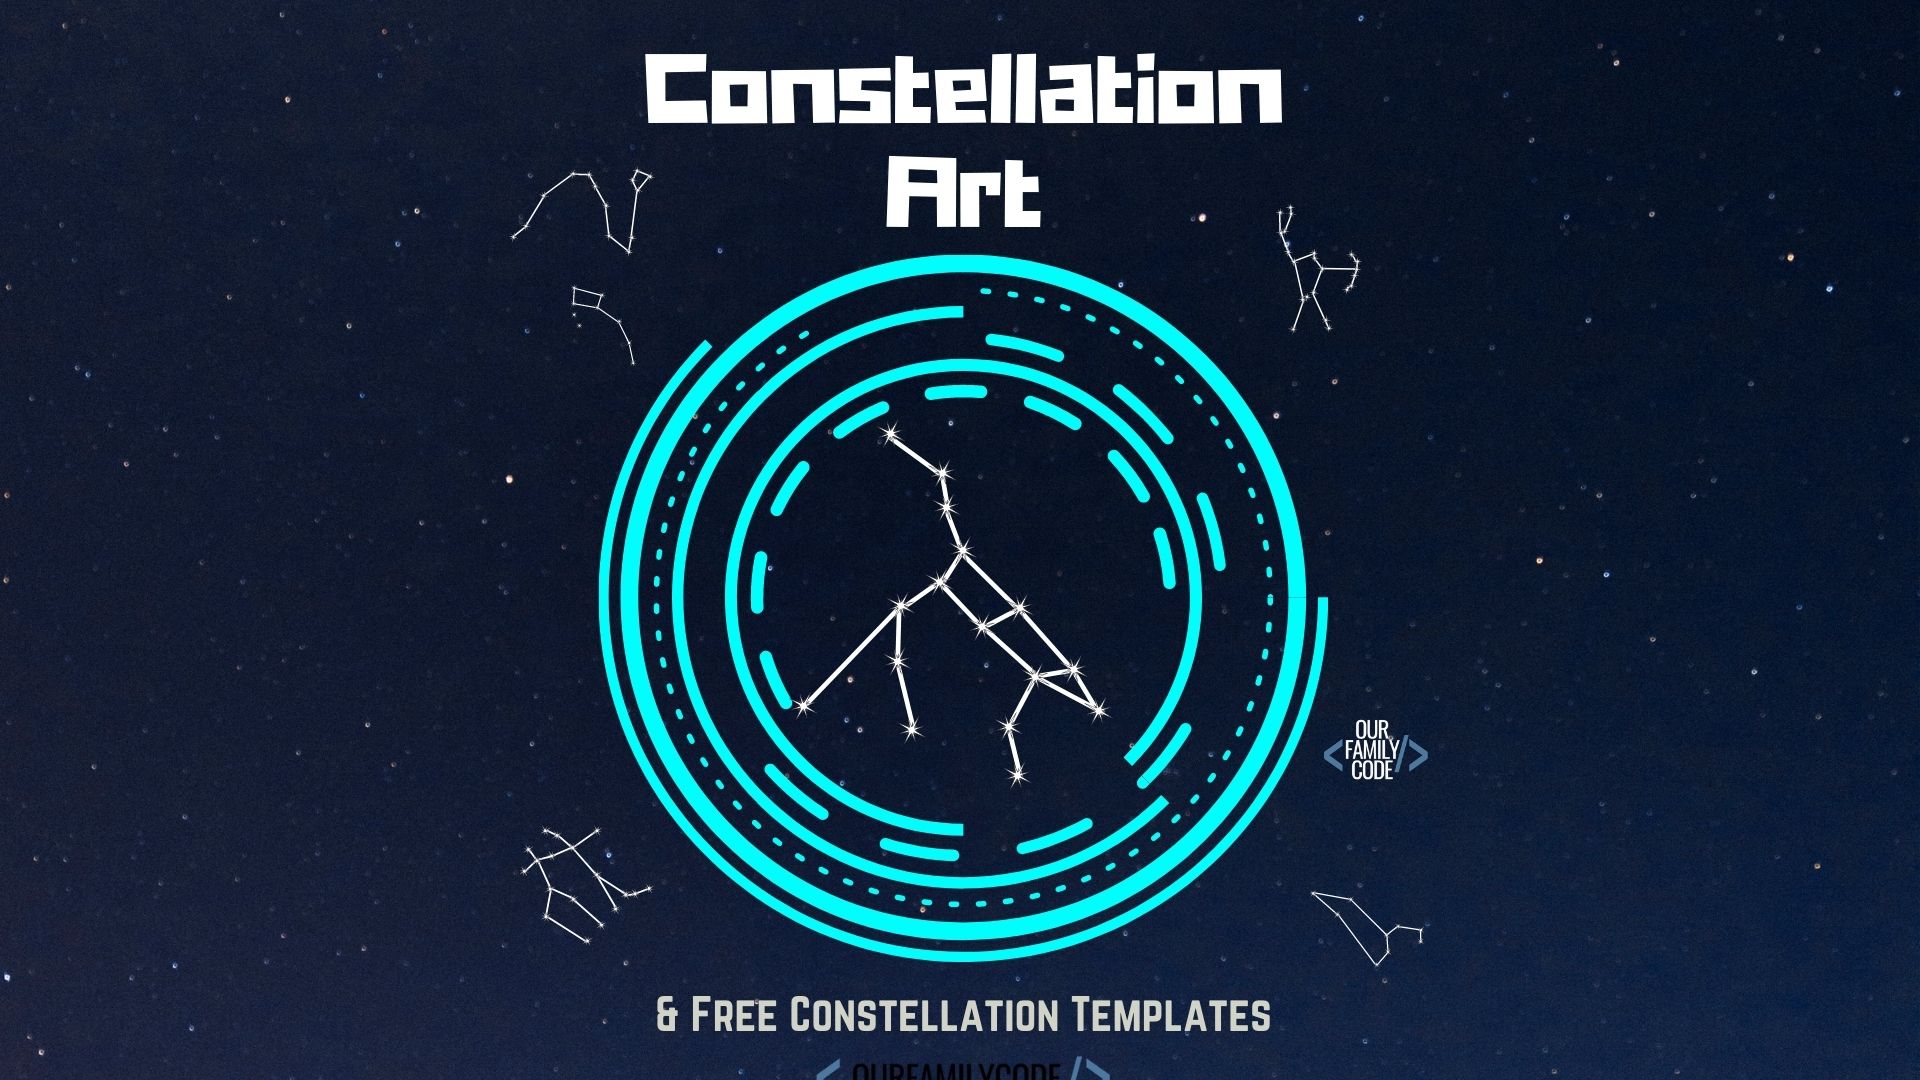 This constellation art activity is great for introducing constellations and sparking a sense of wonder for galaxies and planets above while also helping kids to recognize patterns in the sky by observing, describing, and turning them into art! #STEAM #constellations #kidscrafts